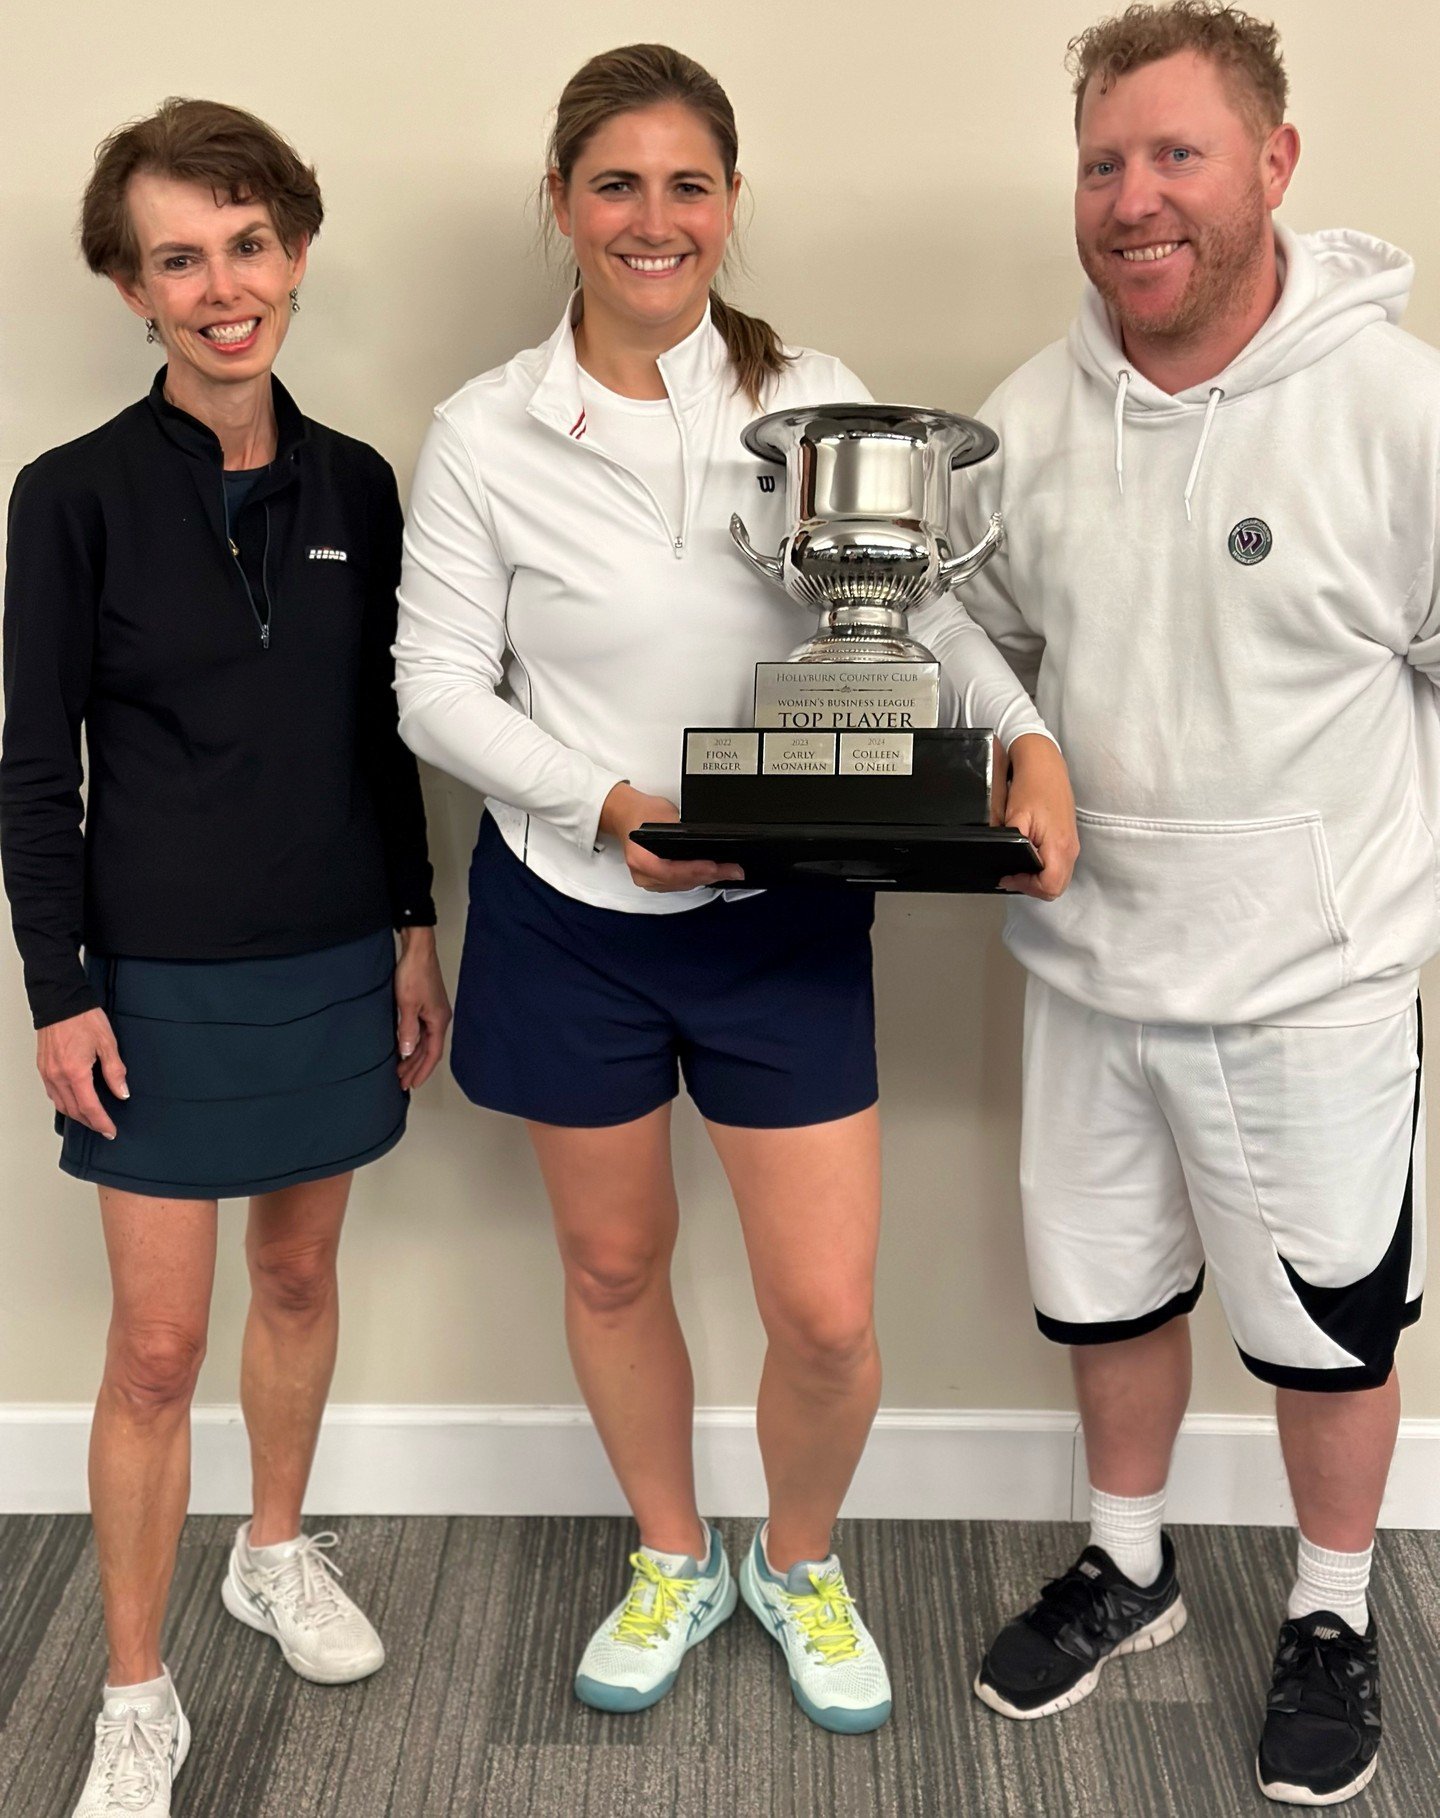 Congratulations to Colleen O&rsquo;Neill on being awarded the Women&rsquo;s Business League Top Player trophy for the season!
.
.
#tenniscanada #tennispro #hollyburncountryclub #HCC #Countryclub #athleticclub #westvancouver #tennisbc #aclubforlife